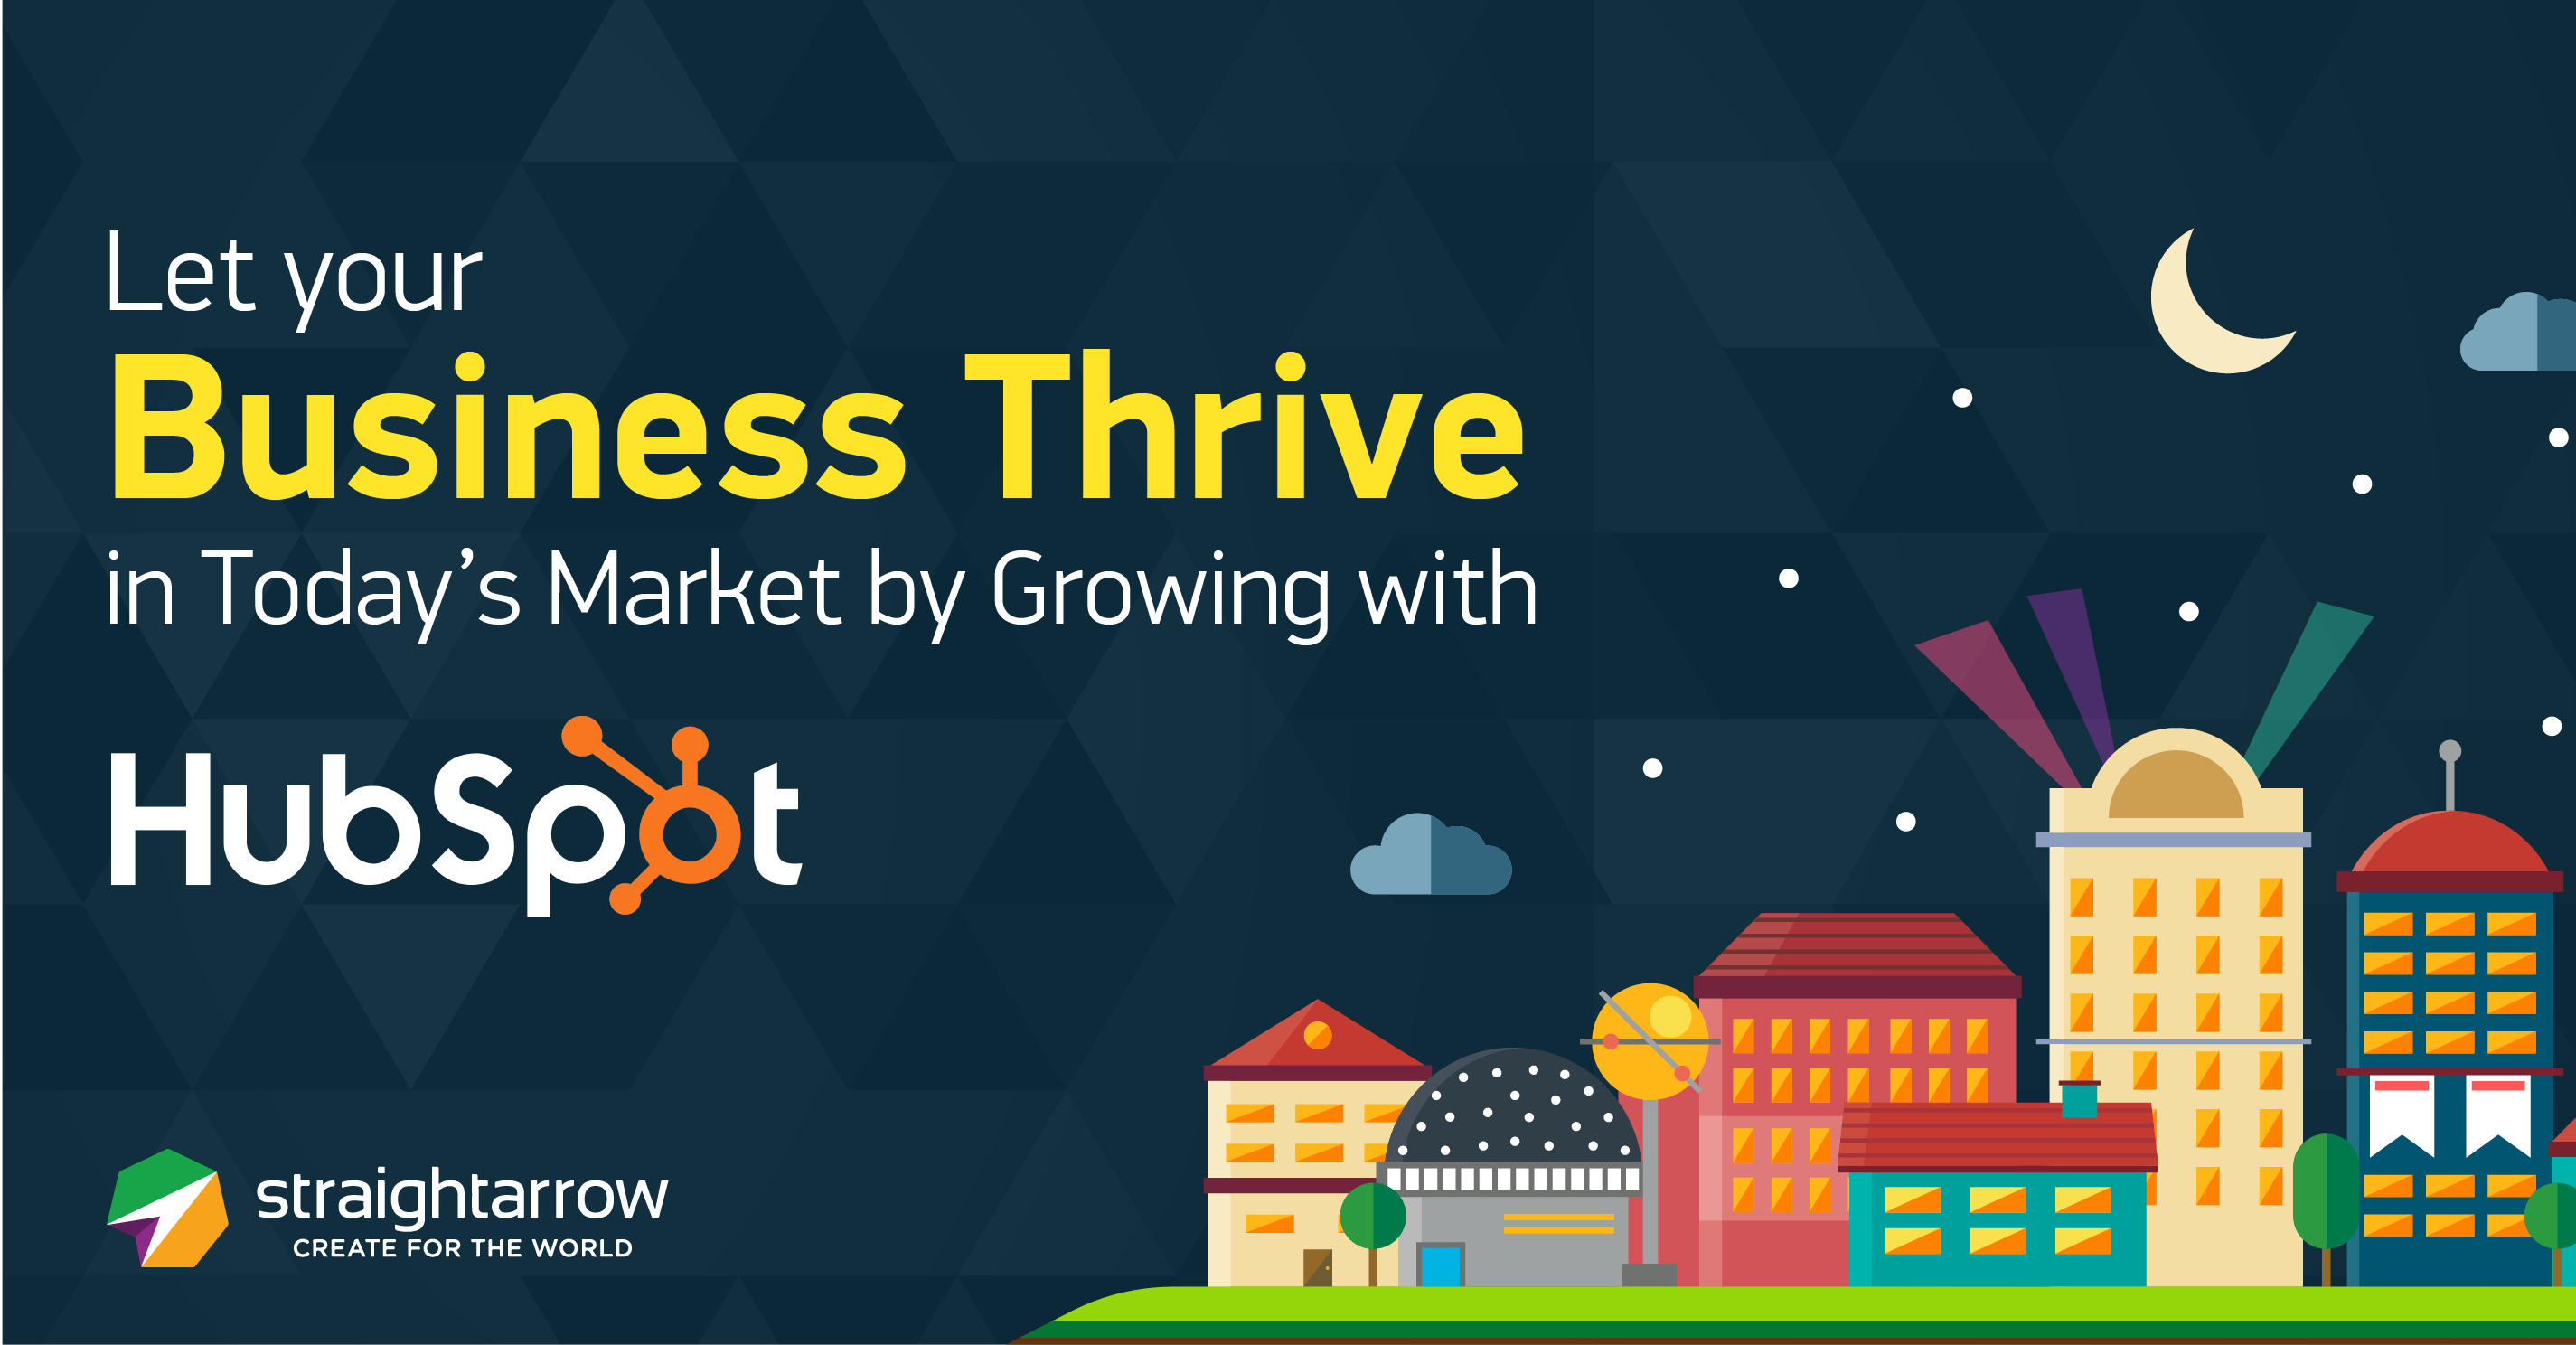 Let your Business Thrive in Today’s Market by Growing with HubSpot